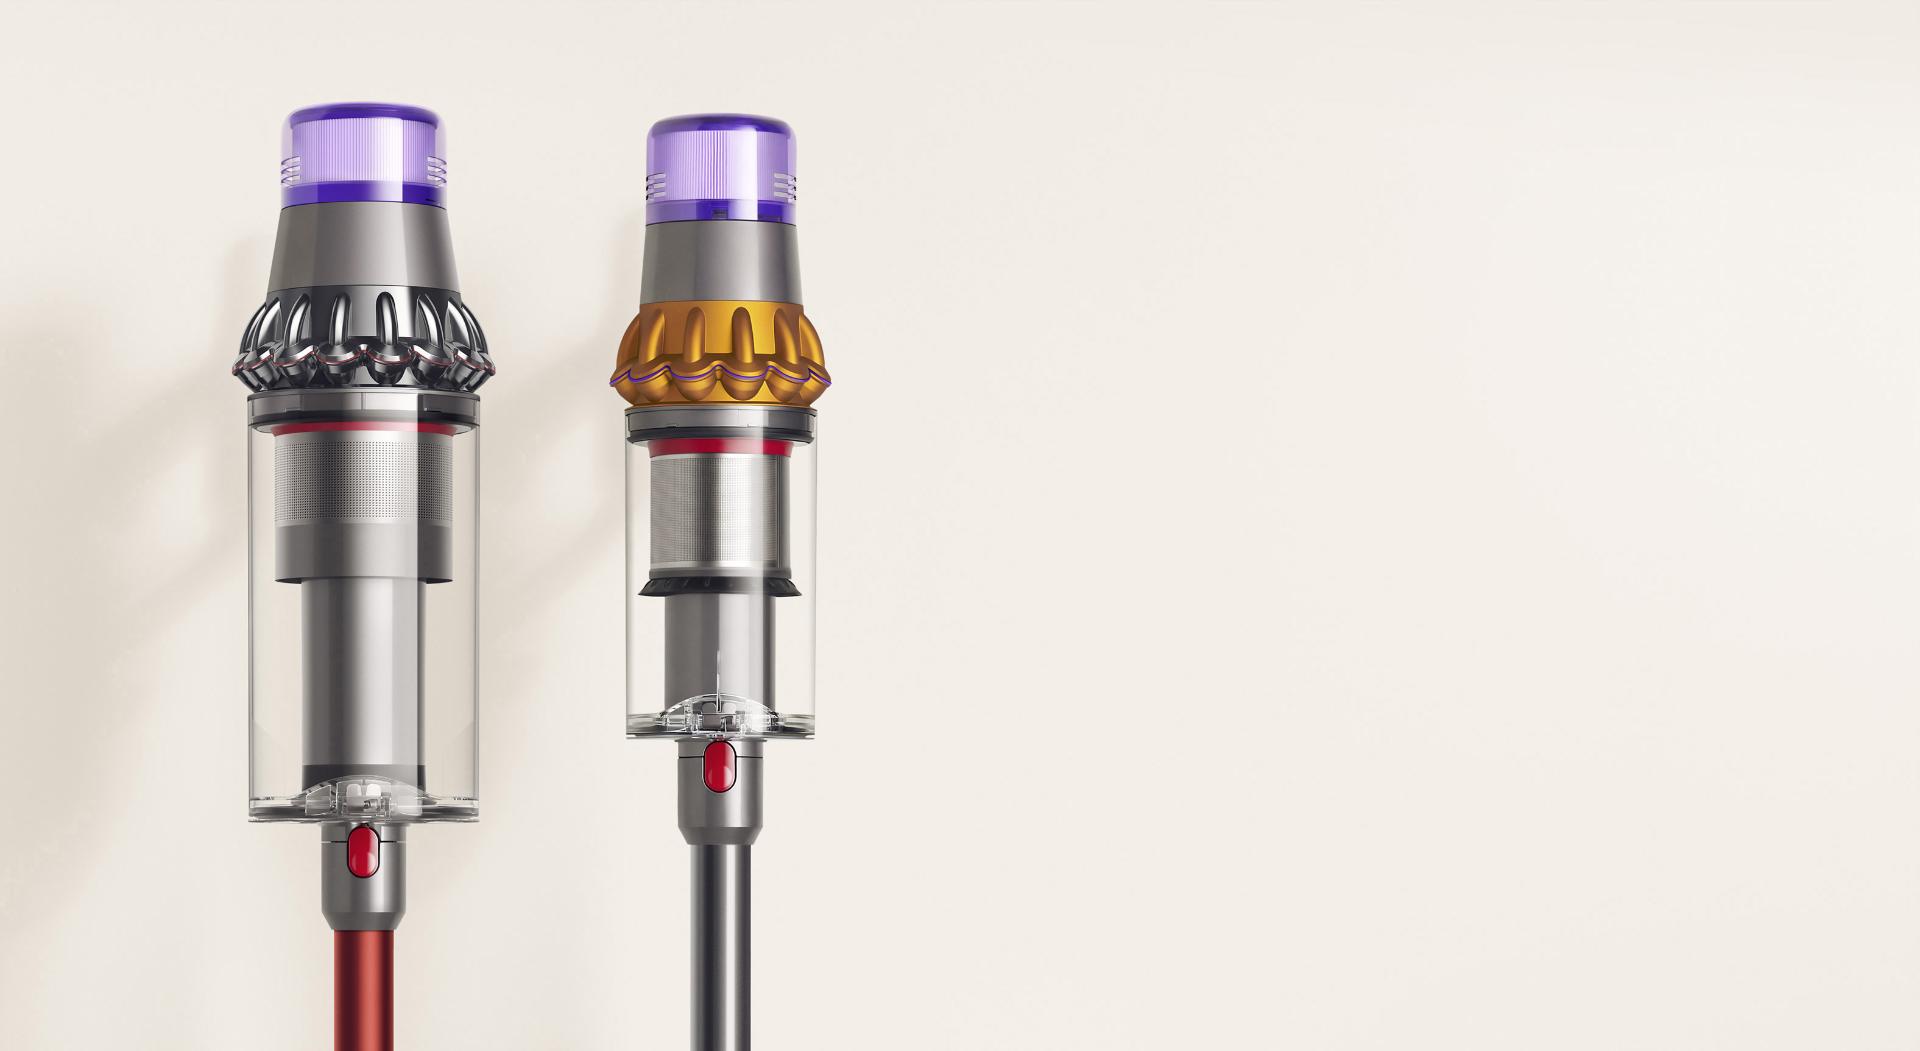 Dyson Outsize vacuum with 150% bigger bin next to a Dyson V11 Absolute vacuum bin